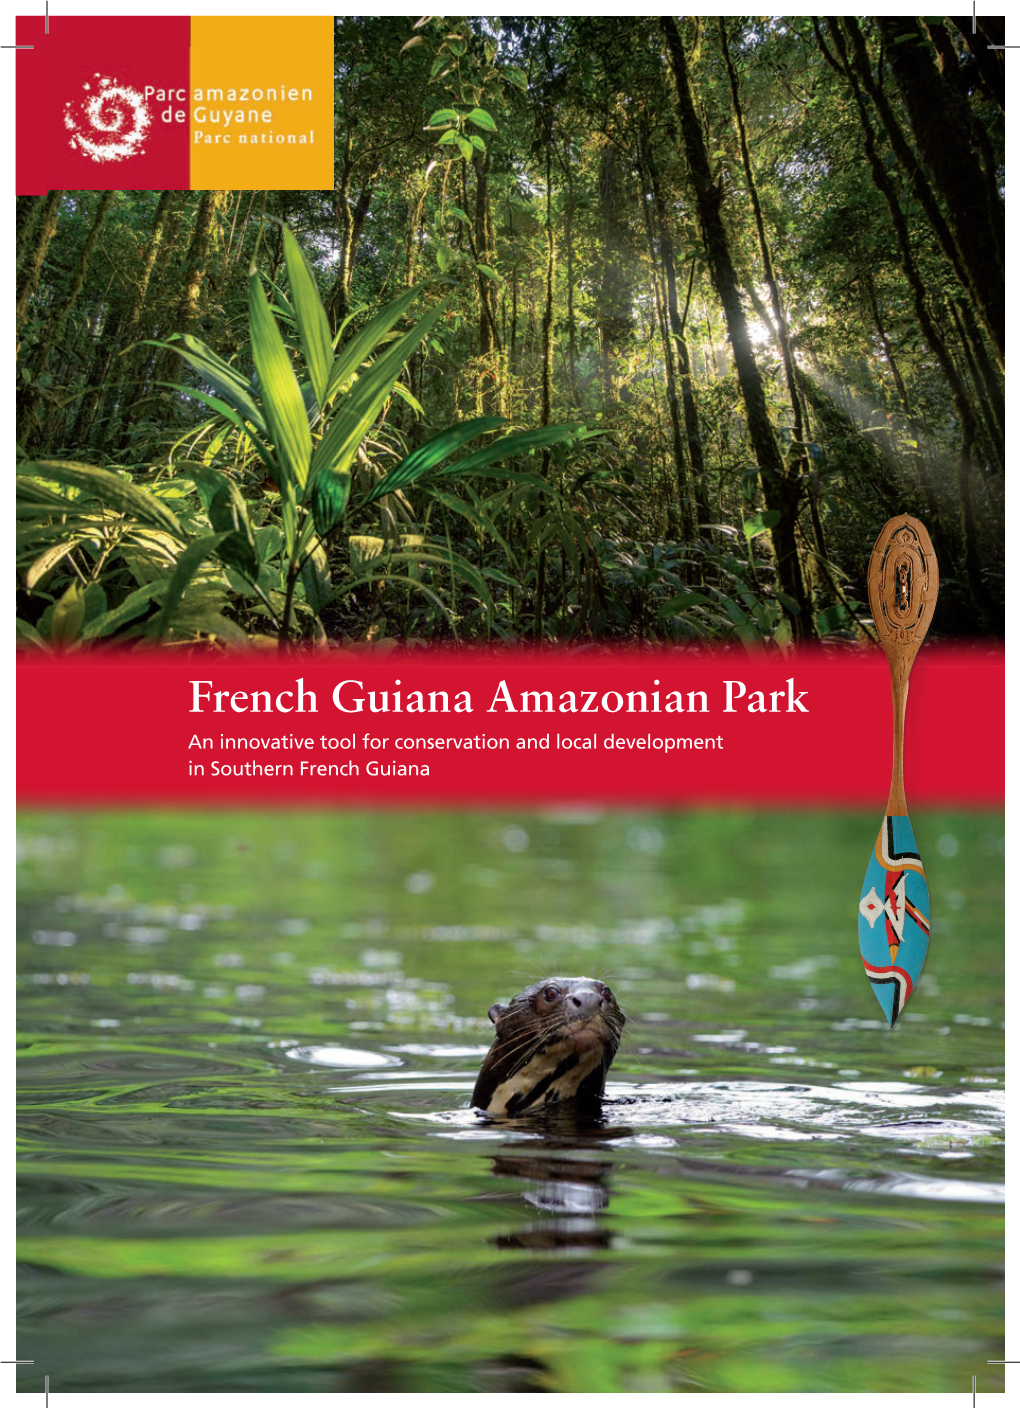 French Guiana Amazonian Park an Innovative Tool for Conservation and Local Development in Southern French Guiana